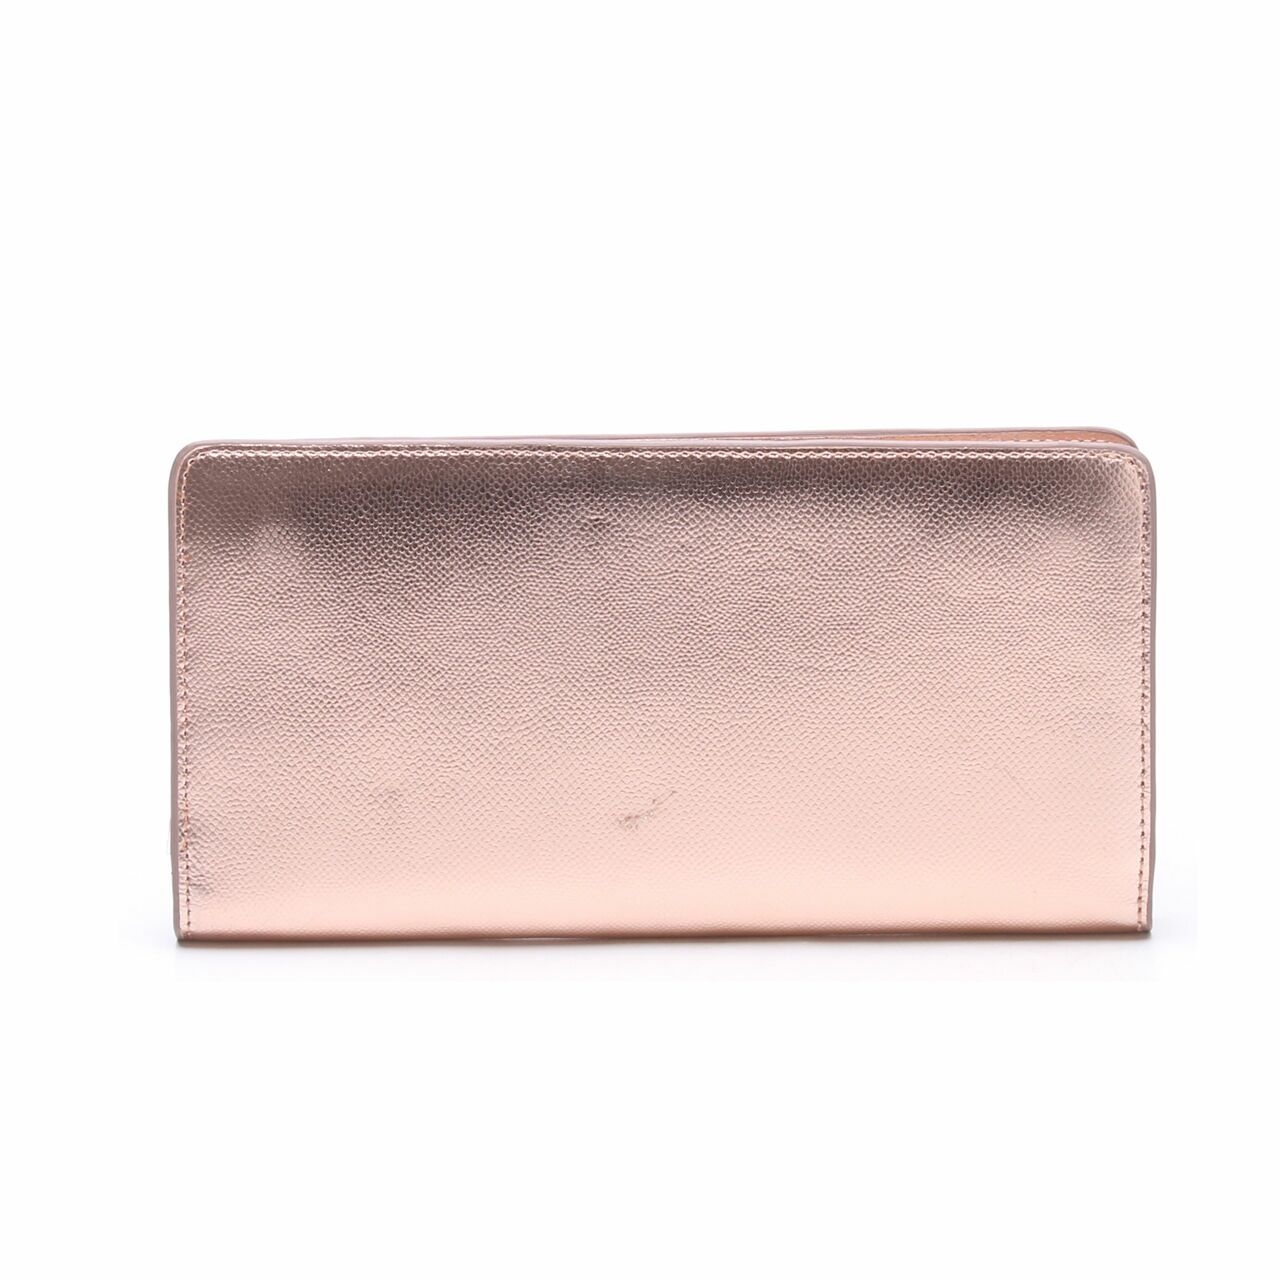 Ted Baker Rose Gold Auriell Matine Leather Zip Around Wallet